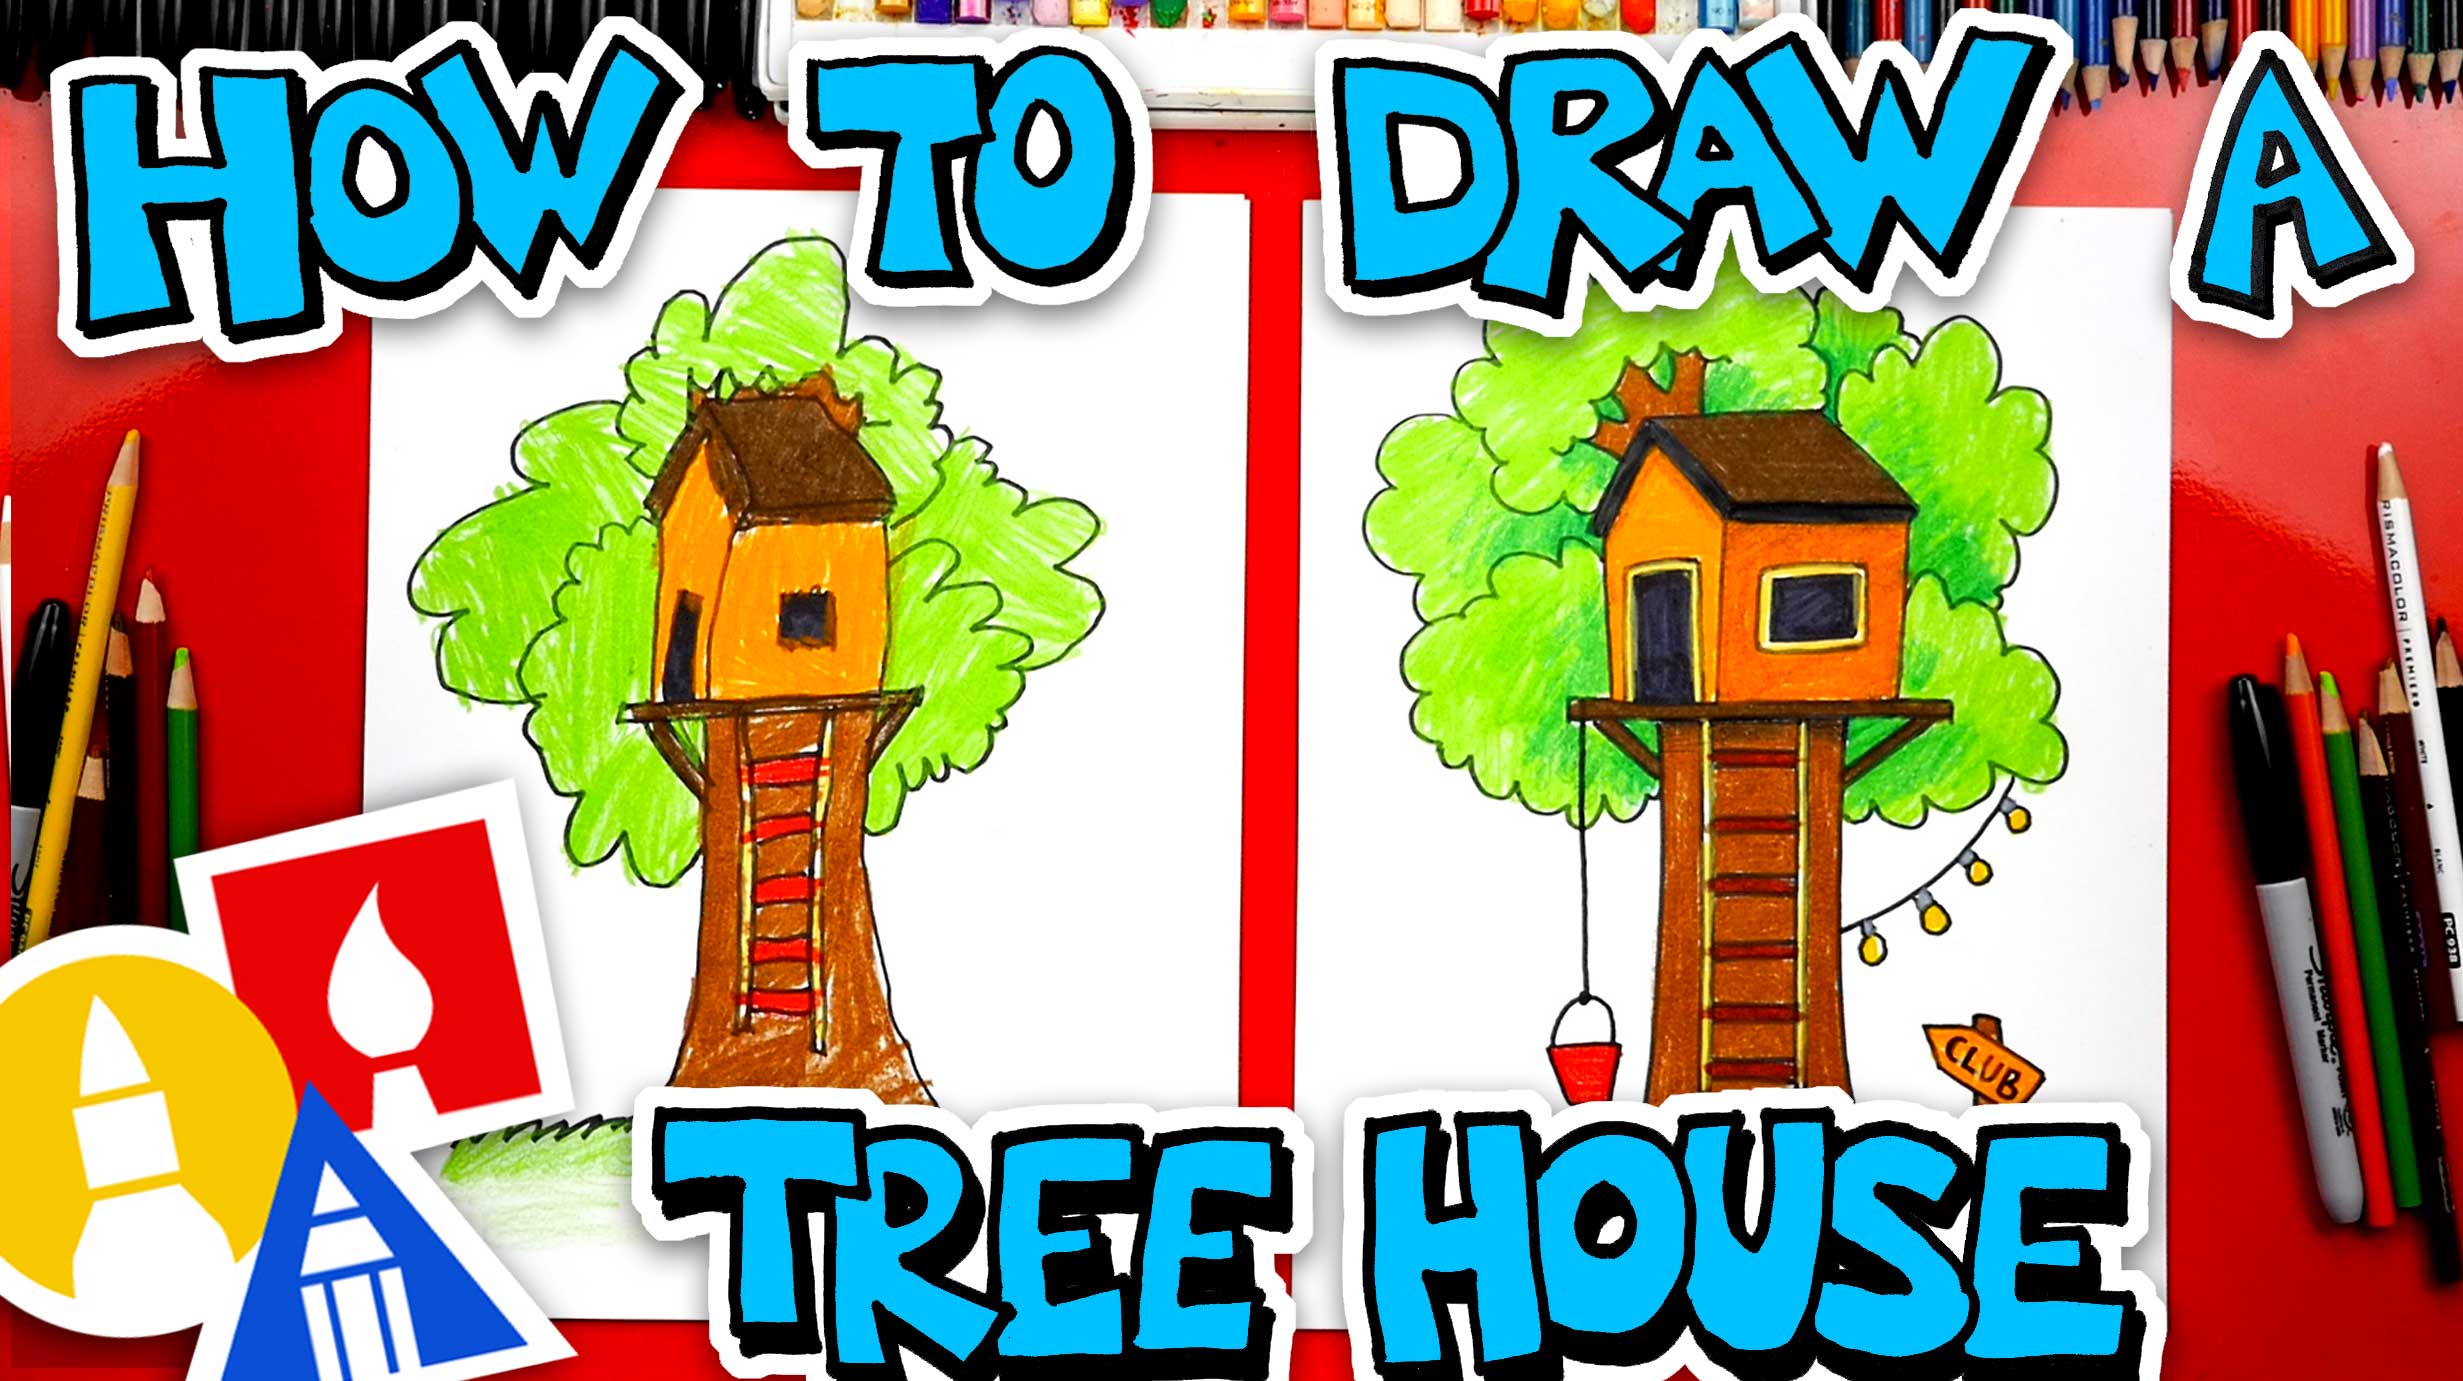 How To Draw A Tree House - Art For Kids Hub -